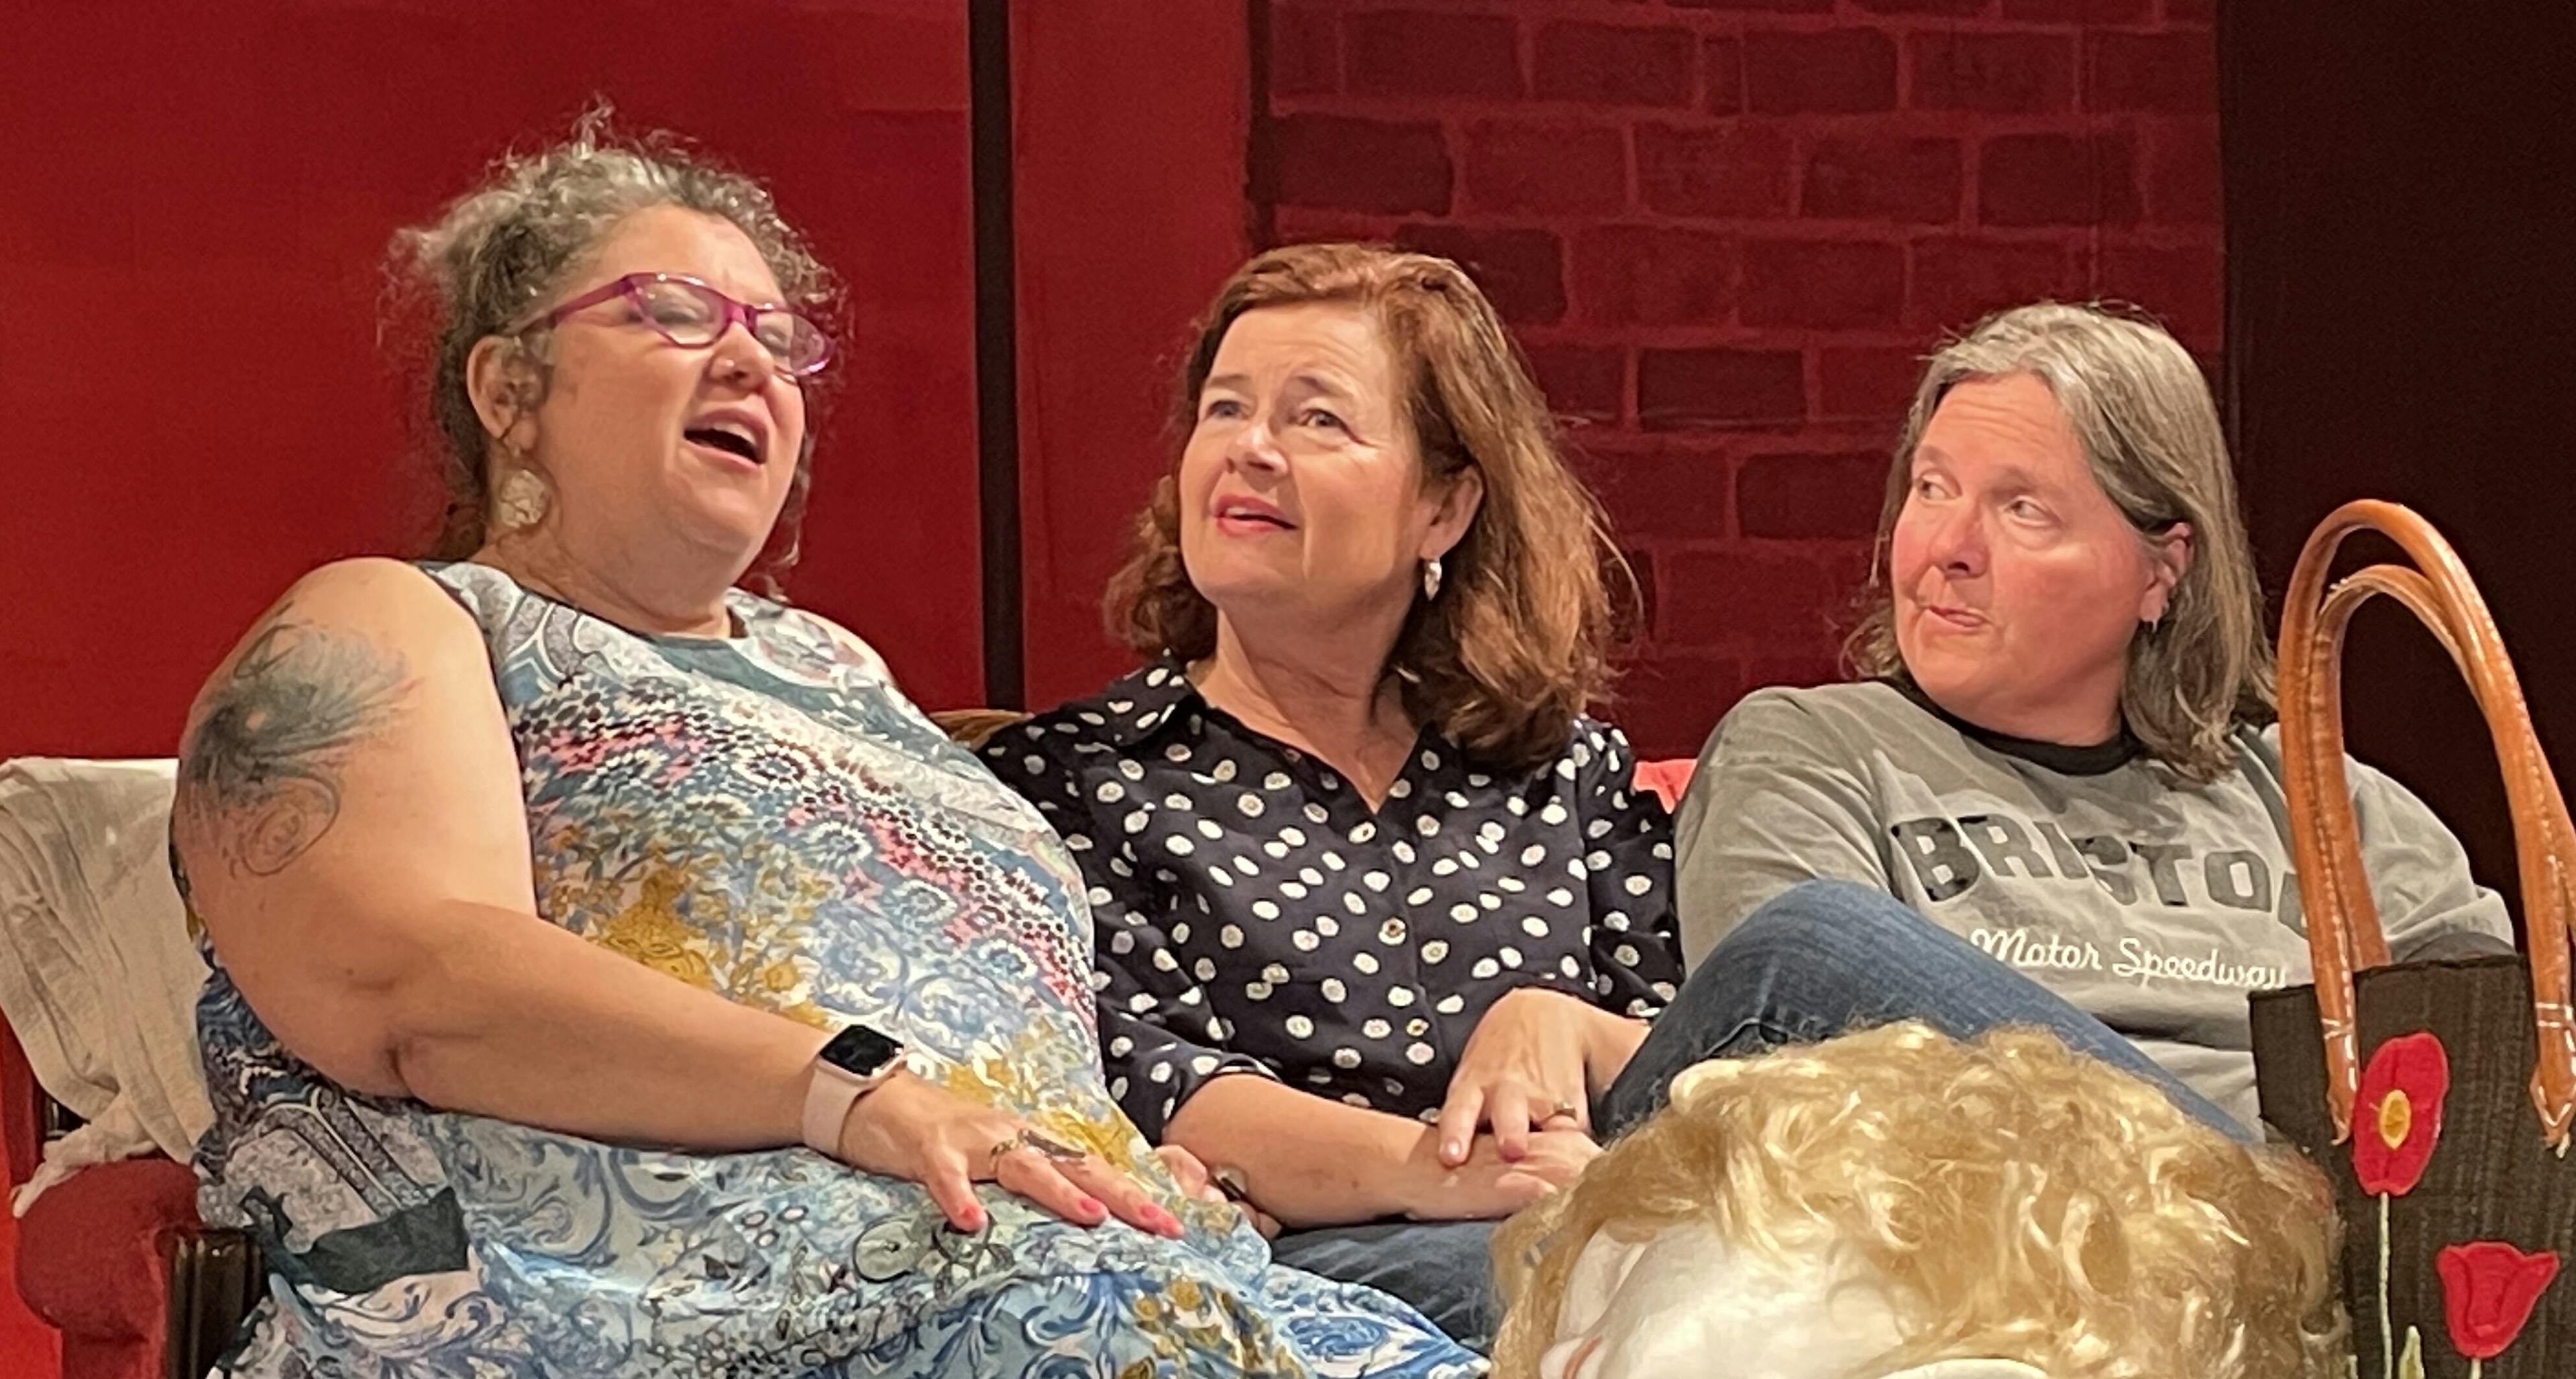 <p>The Cousins: Lesley Snyder as Peaches Verdeen (“The No. 1 Mortuarial Cosmetologist for this part of the state”), Colleen Simm as Gaynelle Verdeen Bodeen, and Susie Mitchell as Jimmie Wyvette Verdeen. (Karen Valihora/Gazette Staff)</p>
